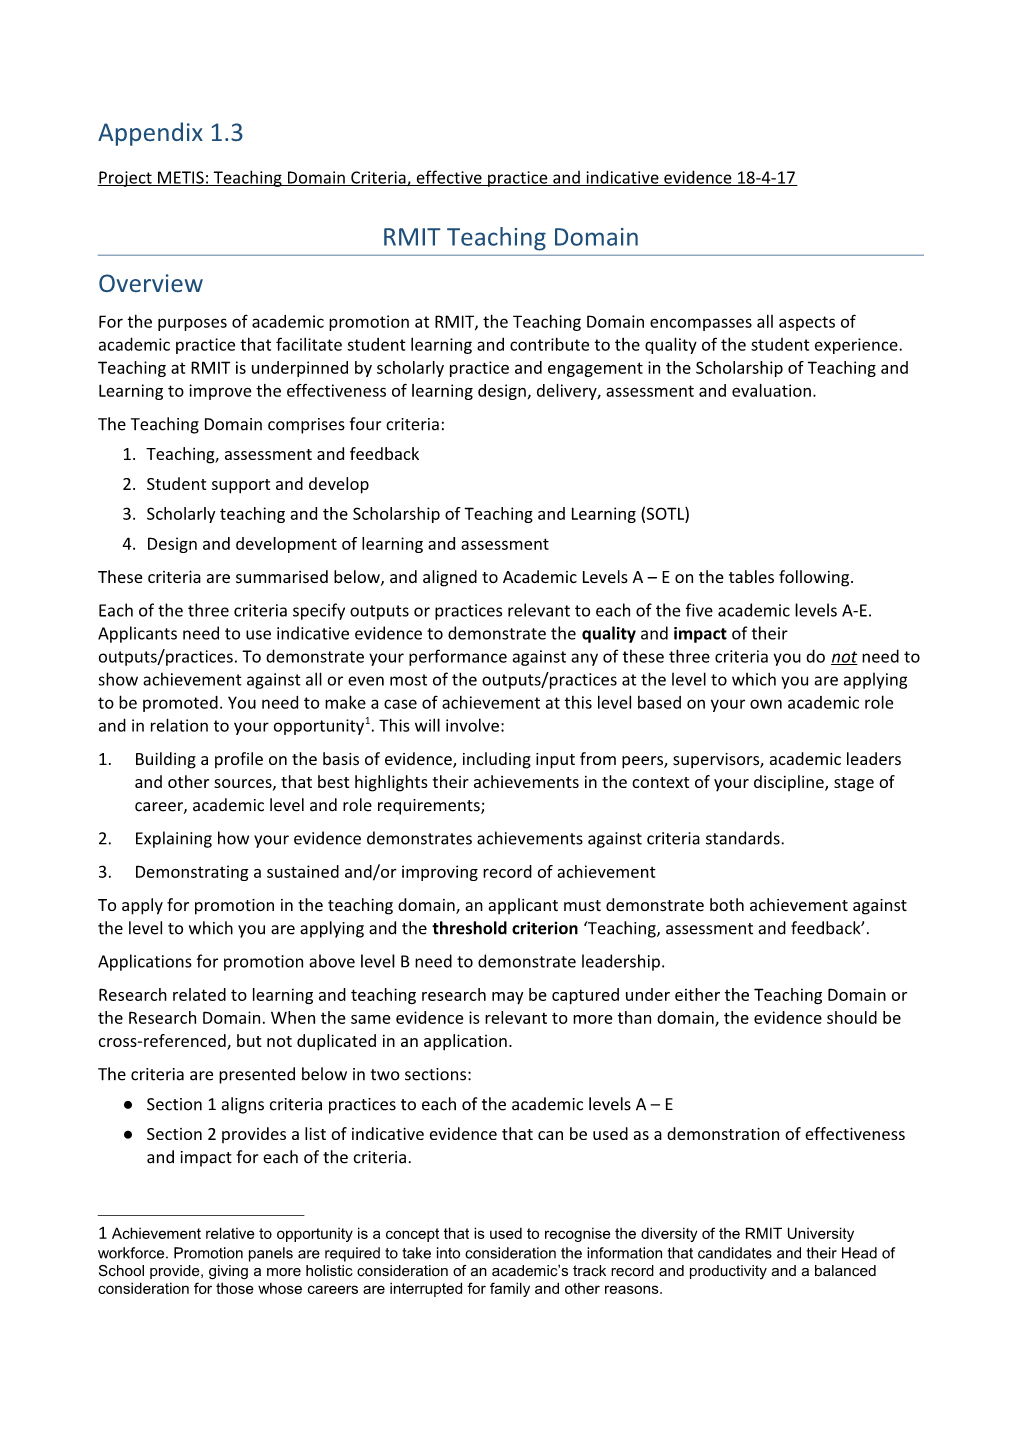 Project METIS: Teaching Domain Criteria, Effective Practice and Indicative Evidence 18-4-17